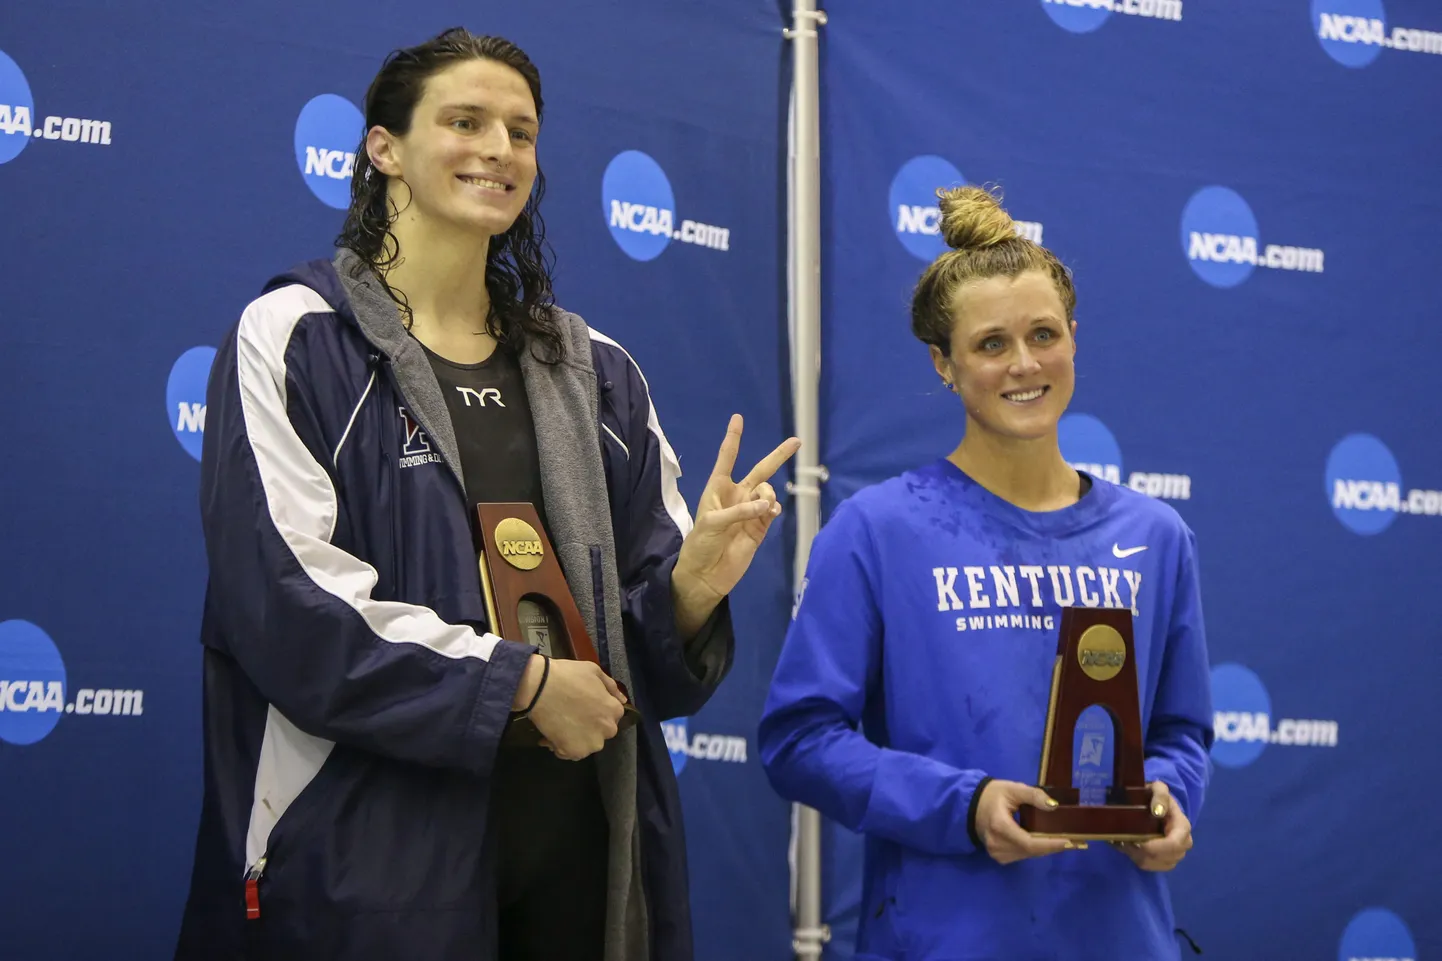 Mar 18, 2022; Atlanta, Georgia, USA; Penn Quakers swimmer Lia Thomas holds a trophy after finishing fifth in the 200 free at the NCAA Swimming & Diving Championships as Kentucky Wildcats swimmer Riley Gaines looks on at Georgia Tech. Mandatory Credit: Brett Davis-USA TODAY Sports